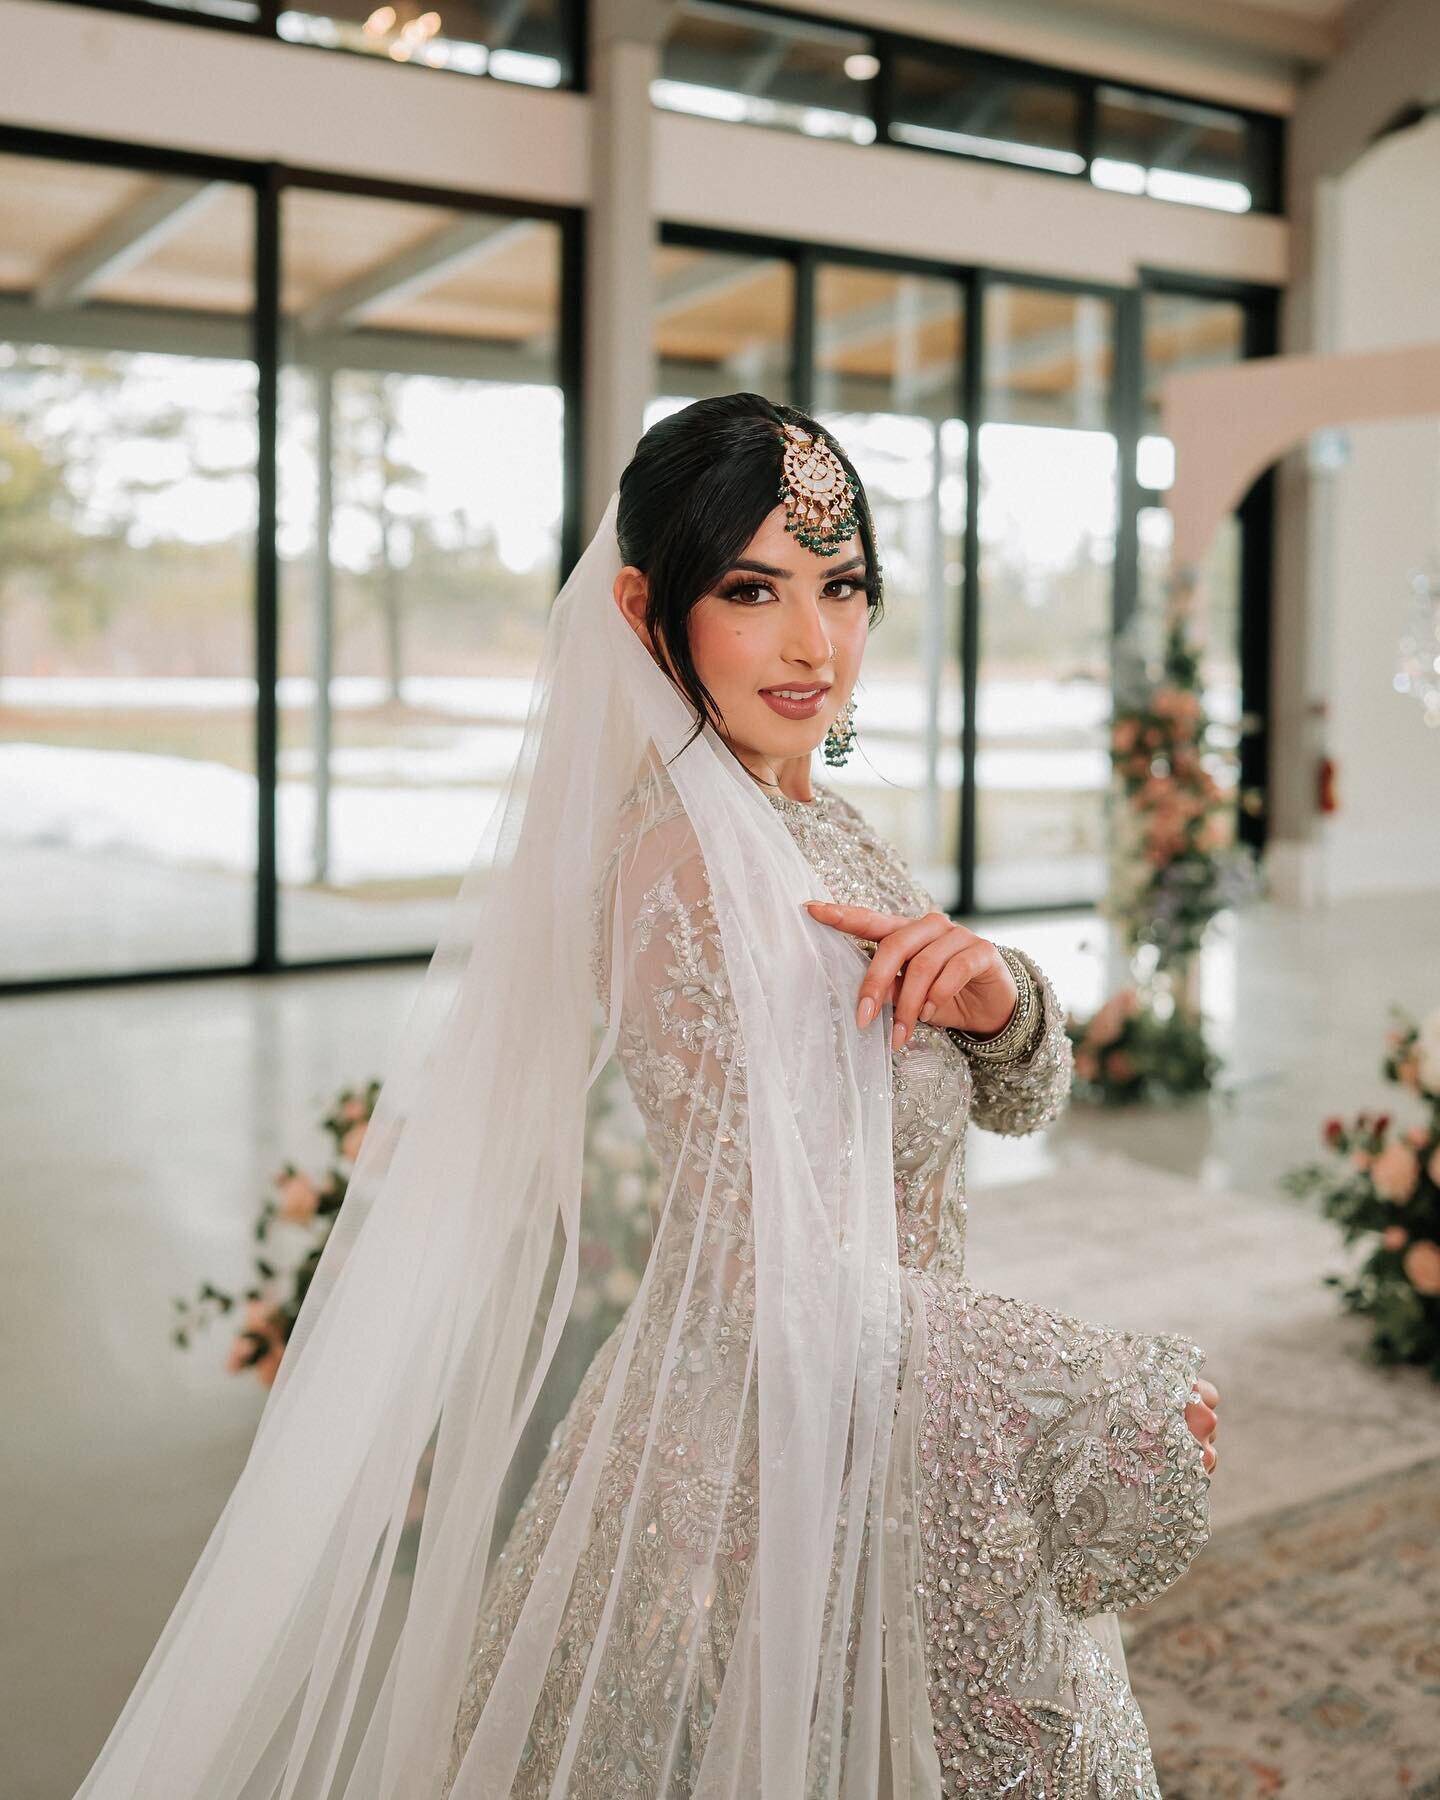 In honour of Women&rsquo;s day today😍😍

Floral and design decor: @mysticeventsdecor
Photography: @elmoakstudios
Videography: @14thnovemberstudio
Venue: @threefeathersterrace 
Hair: @hairbyshay.n
Makeup: @makeupbyaishaz
Pakistani dress: @sabeenjahan